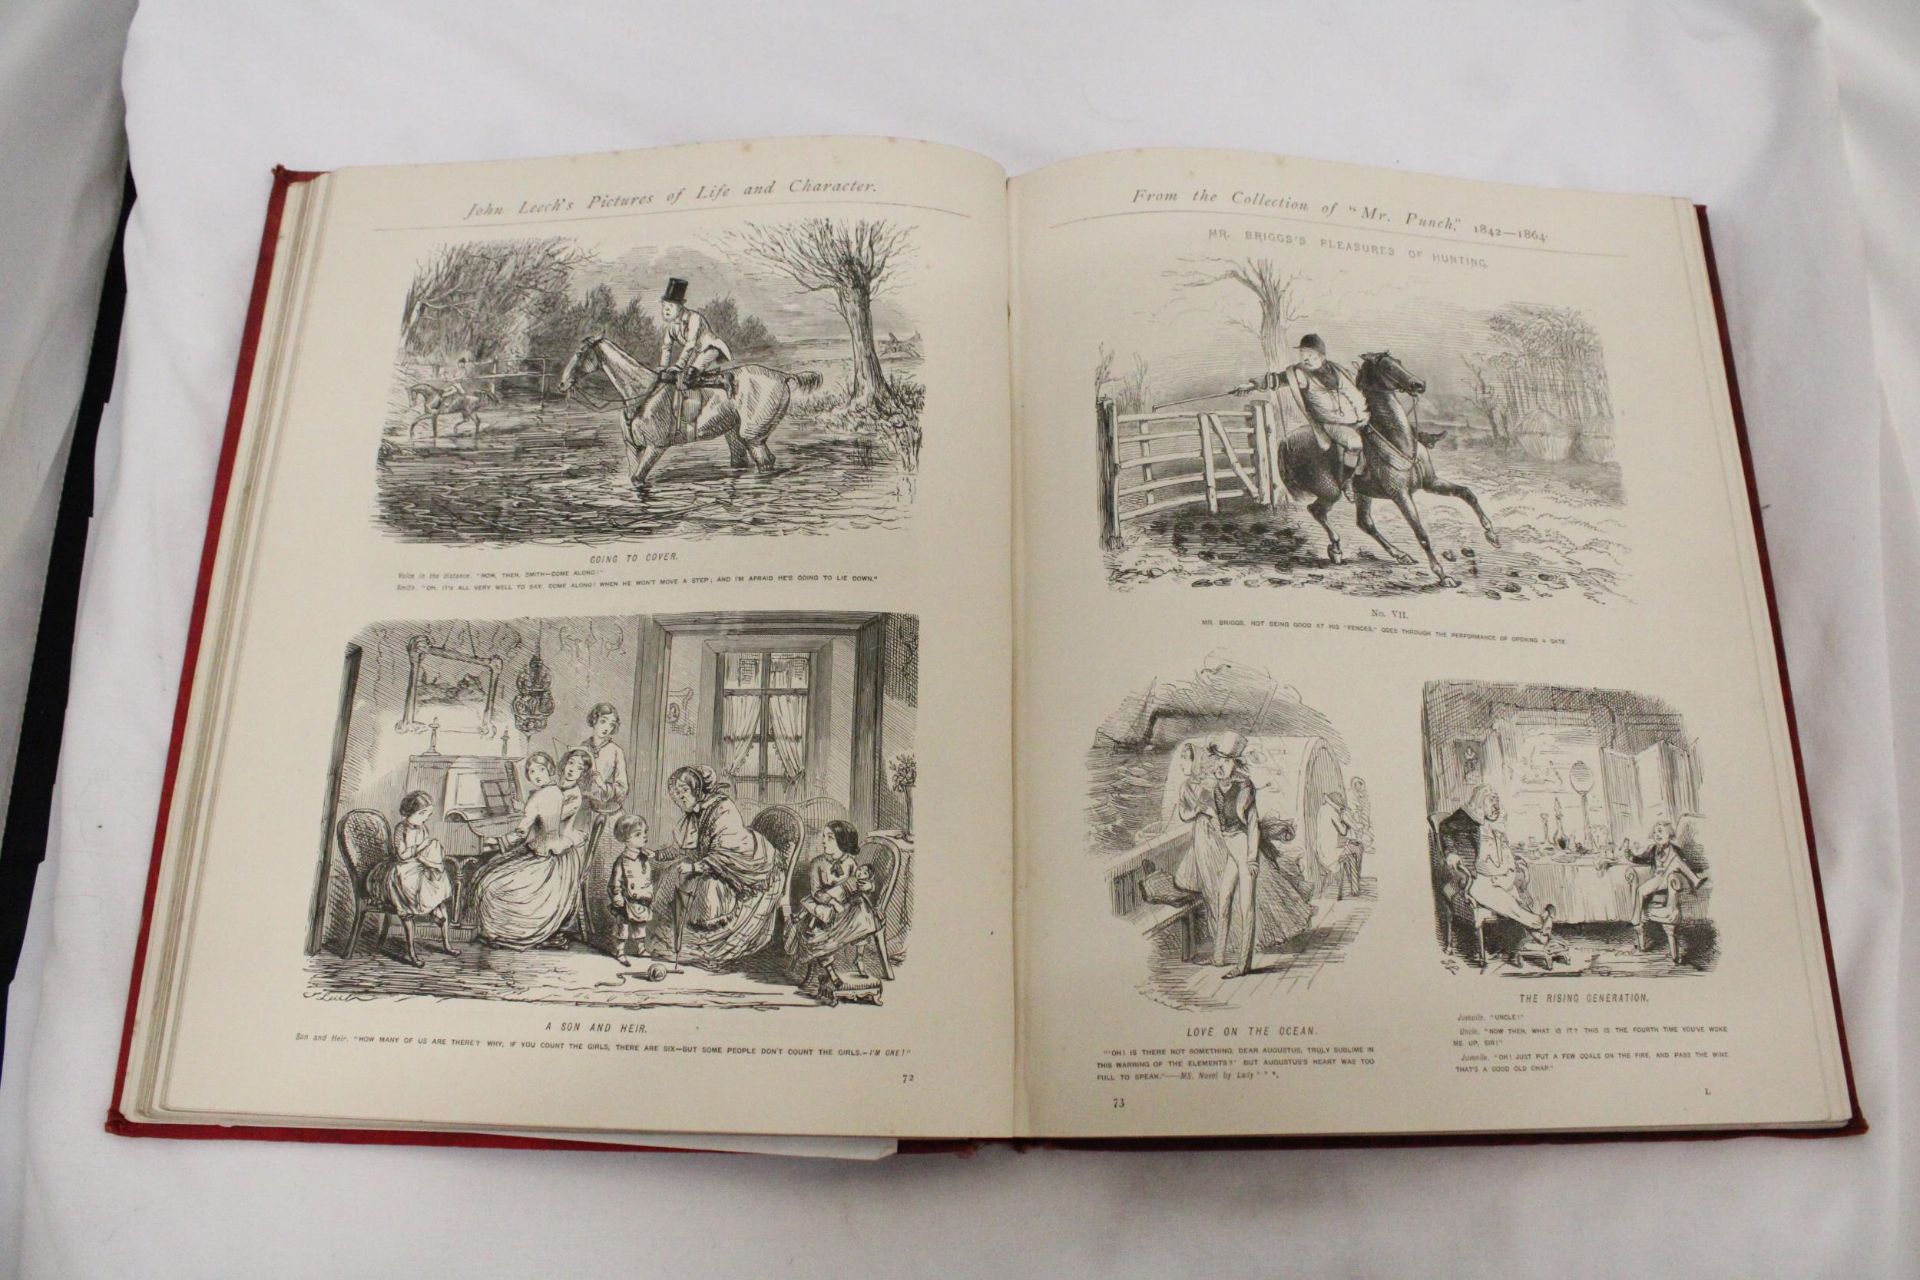 AN ANTIQUARIAN, 1886, COPY OF, JOHN LEECH'S PICTURES OF LIFE AND CHARACTER, FROM THE COLLECTION - Image 5 of 6